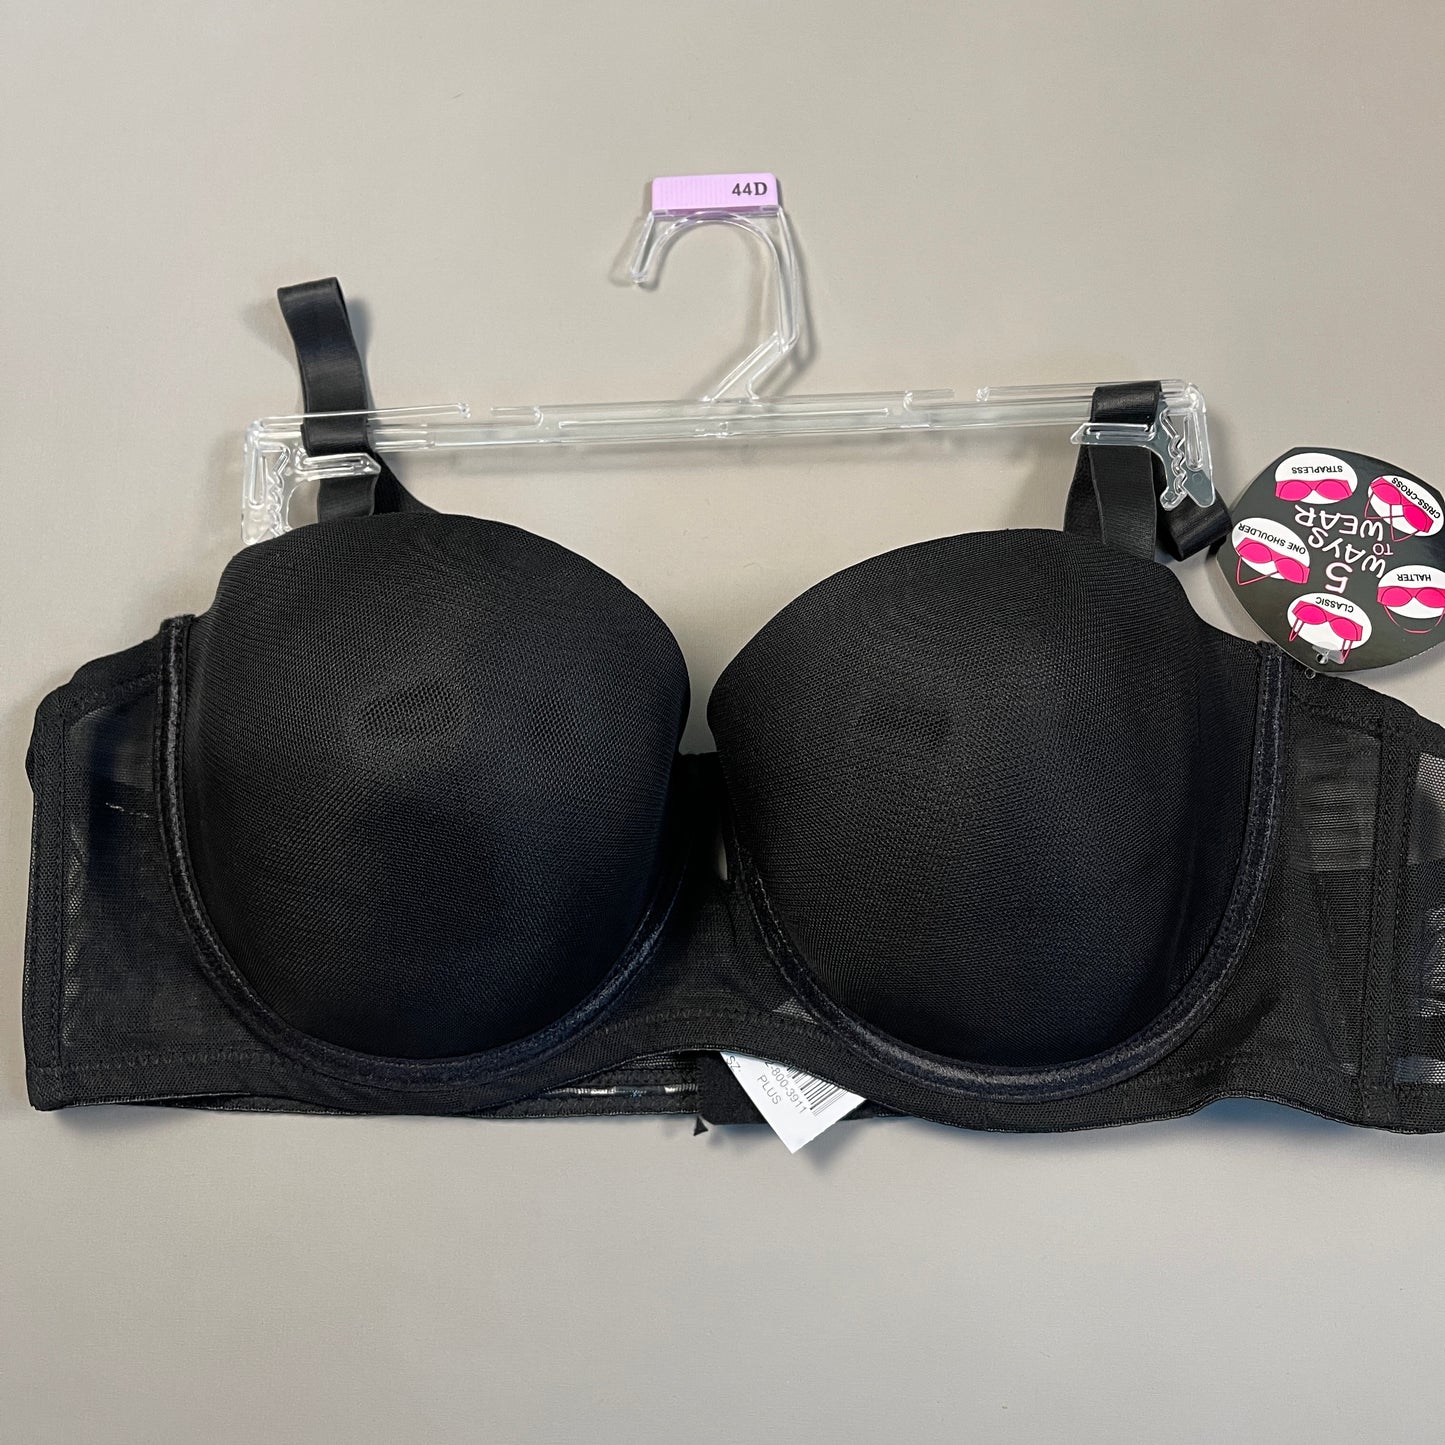 BLACK FUCHSIA By Secret Lace Bra Set Of 4 Size 44D Plus Black and Nude (New)